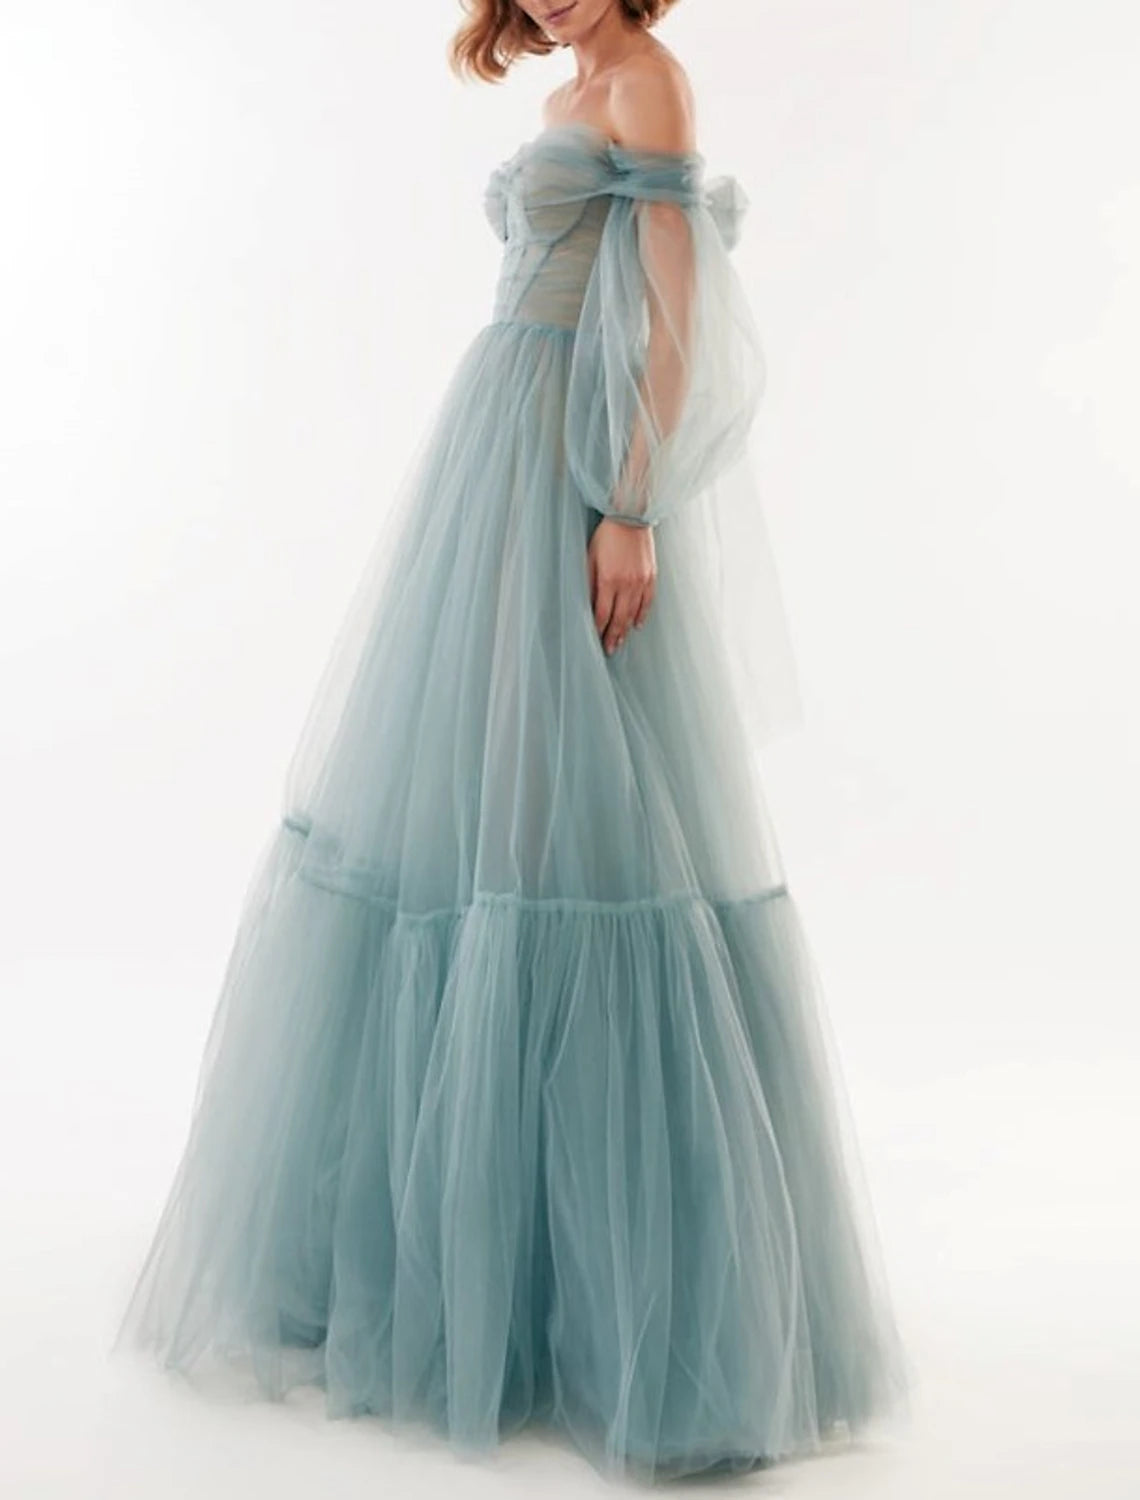 A-Line Elegant Sexy Wedding Guest Prom Dress Off Shoulder Long Sleeve Floor Length Tulle with Bow(s) Pleats